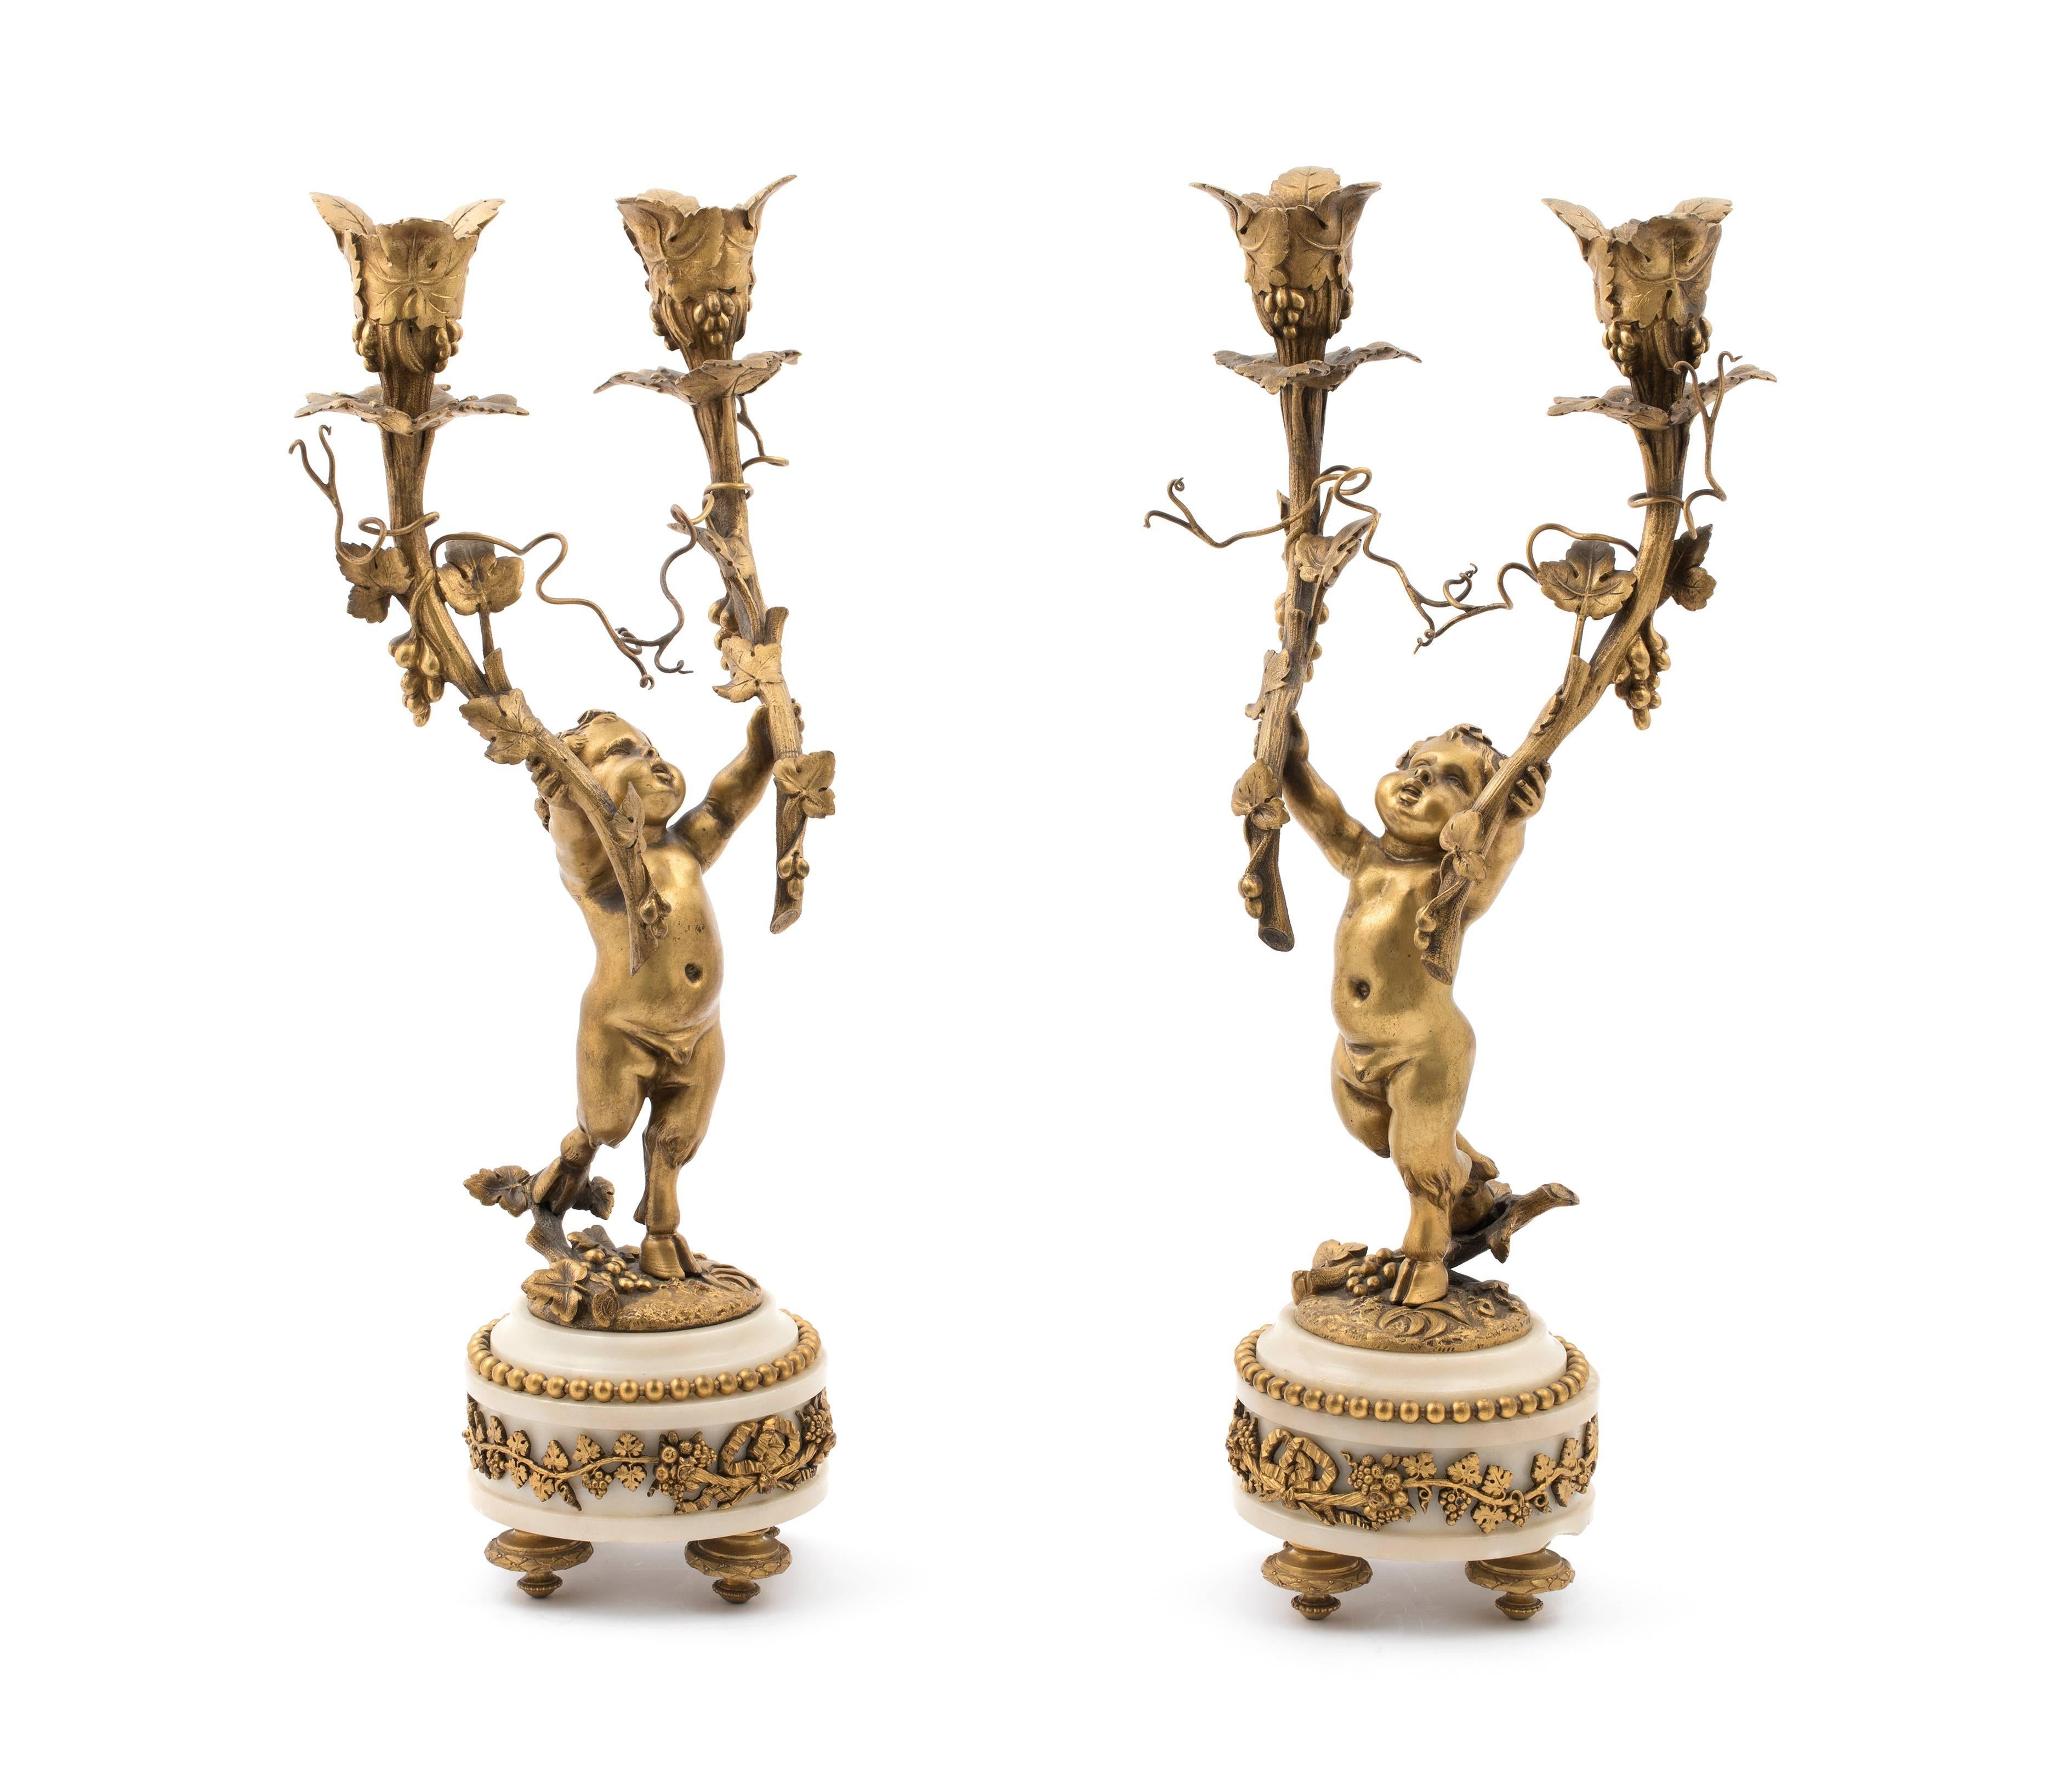 A pair of Napoleon III gilt bronze and marble two-light figural candelabra, in the manner of Jean-Michel Clodion, circa 1880.
In Louis XVI style, each modelled as a cherub holding aloft two grape vine shaped candle-arms with naturalistically